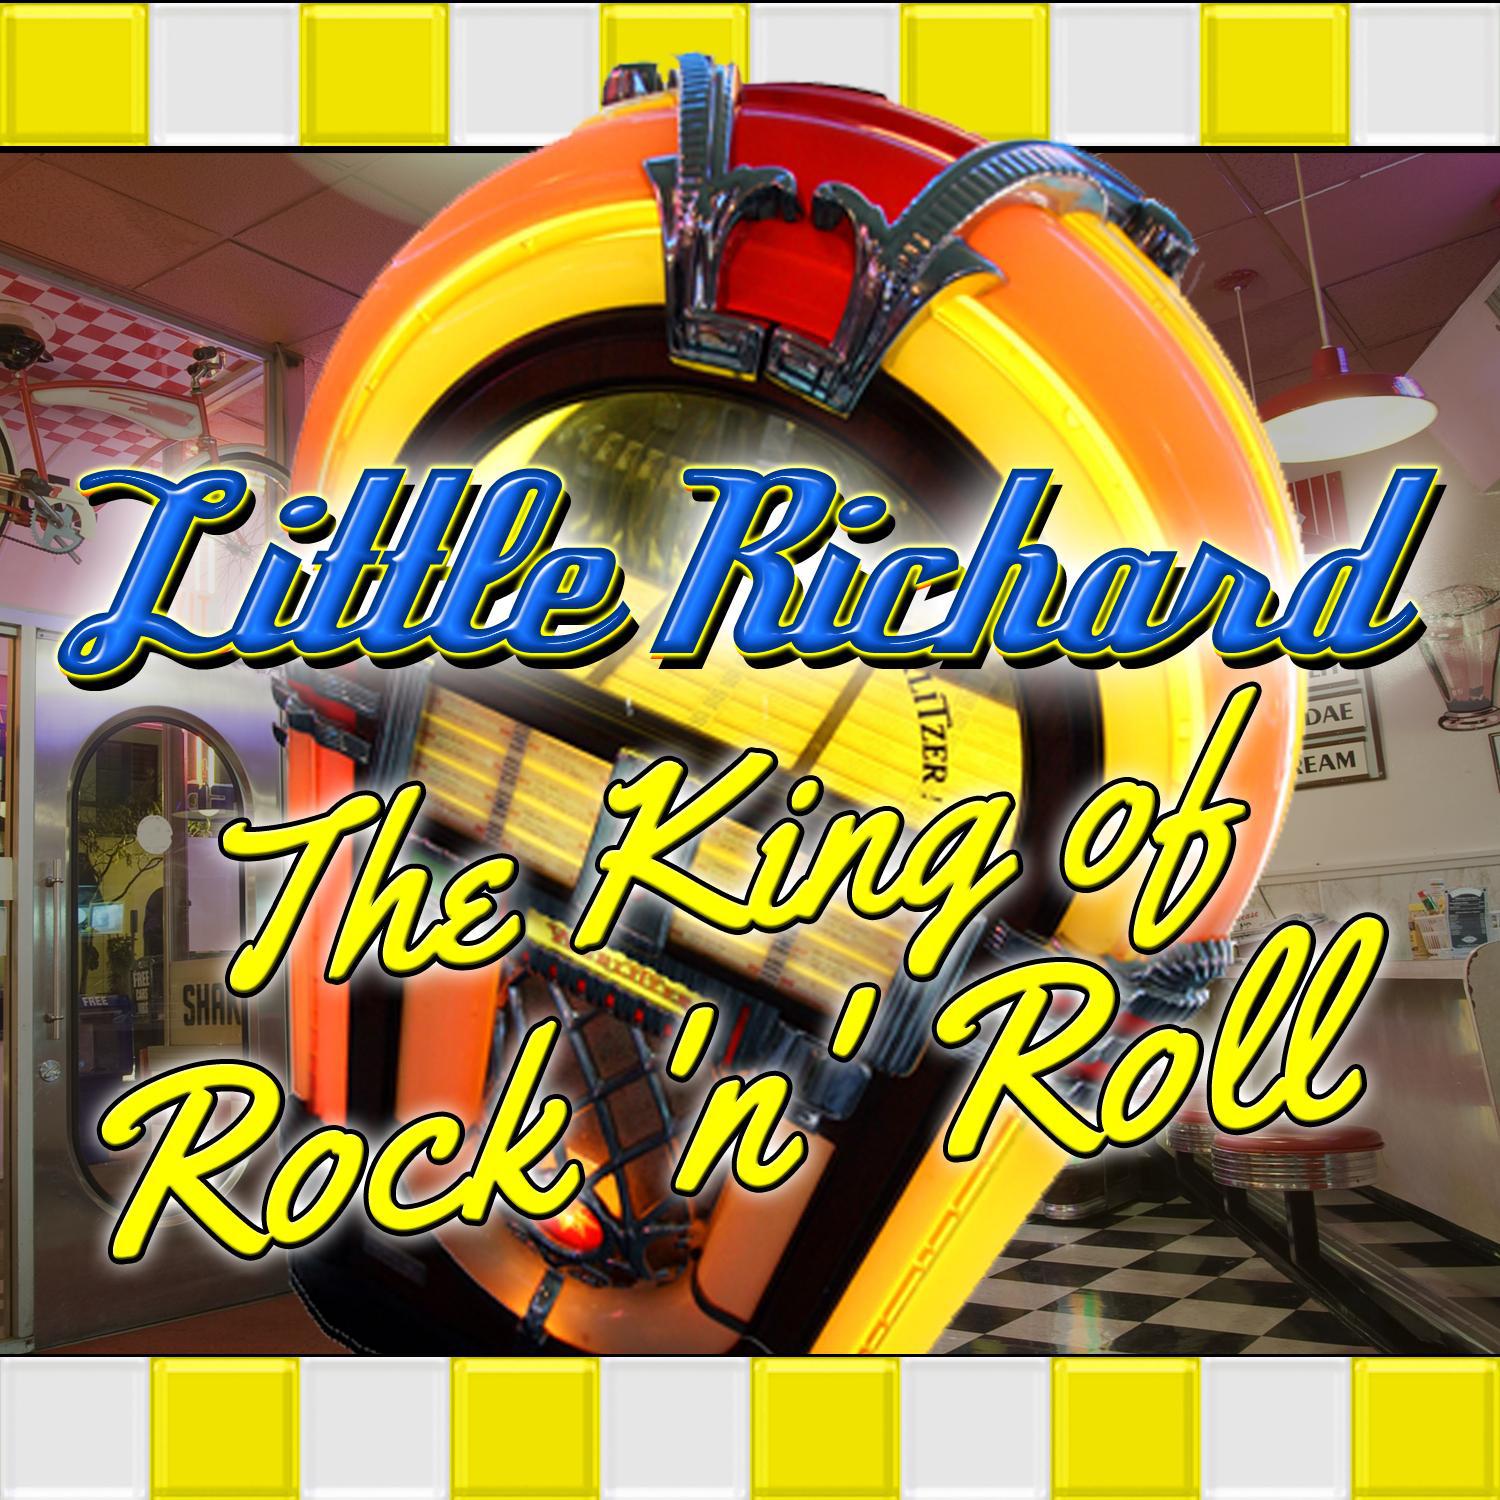 The King of Rock 'N' roll